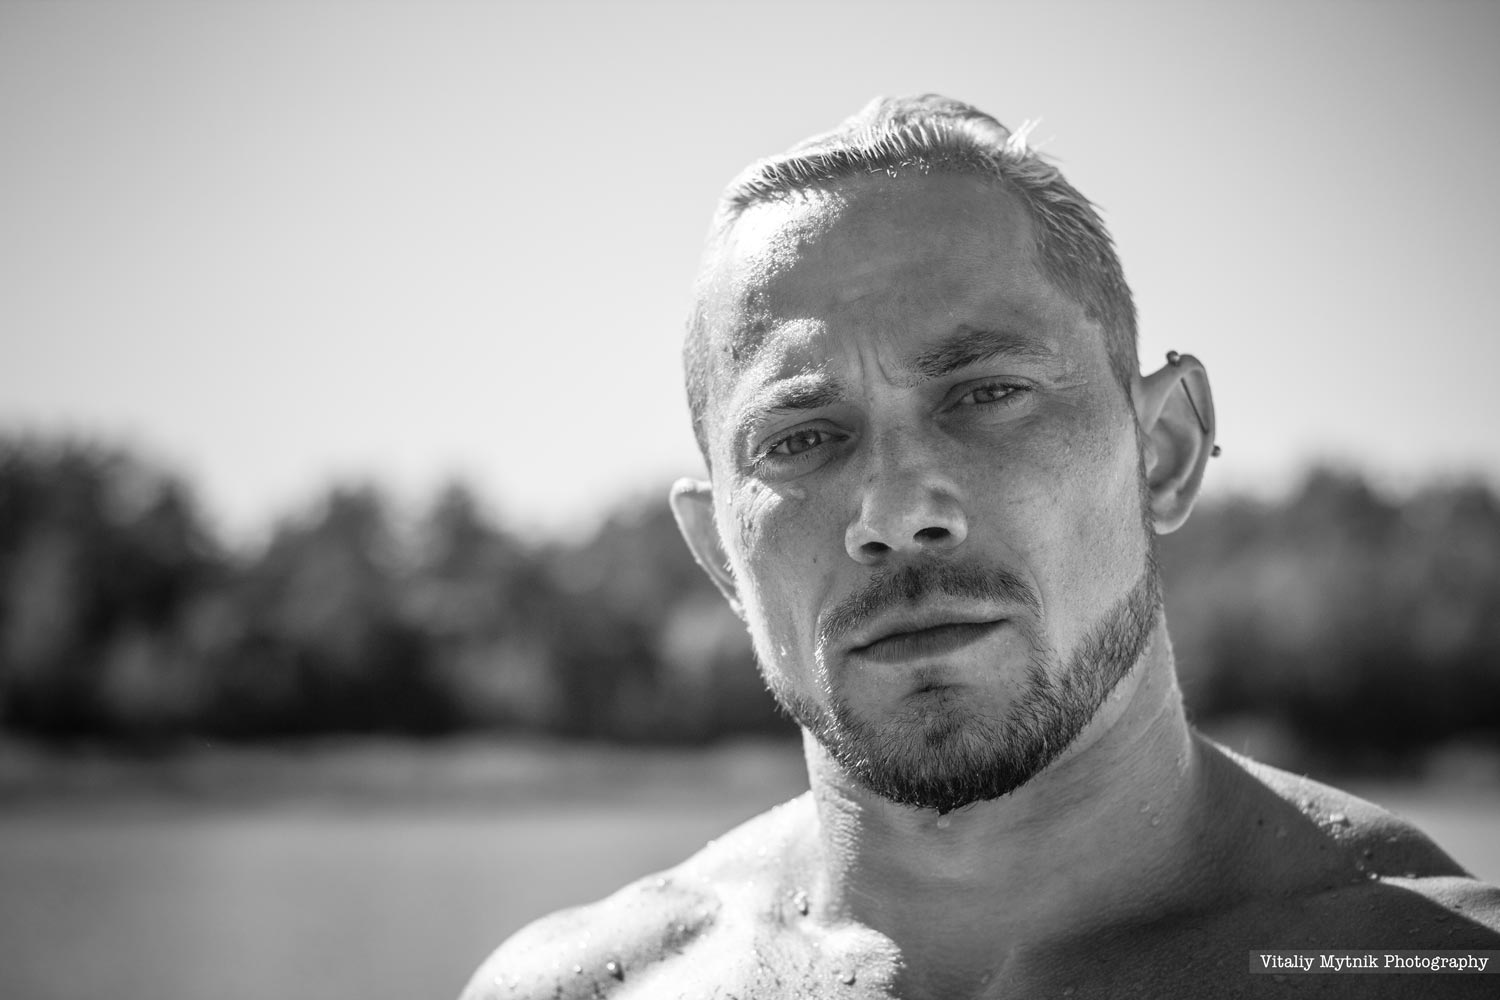 People, One Person, Male, One Man Only, Adult, One Adult Only, Mid Adult Man, One Mid Adult Man Only, Mid Adult, One Mid Adult Only, Man, Portrait, Looking At Camera, Outdoors, Shirtless,  Portrait, Lifestyles, Day, Front View, Leisure Activity, Focus On , Виталий Мытник